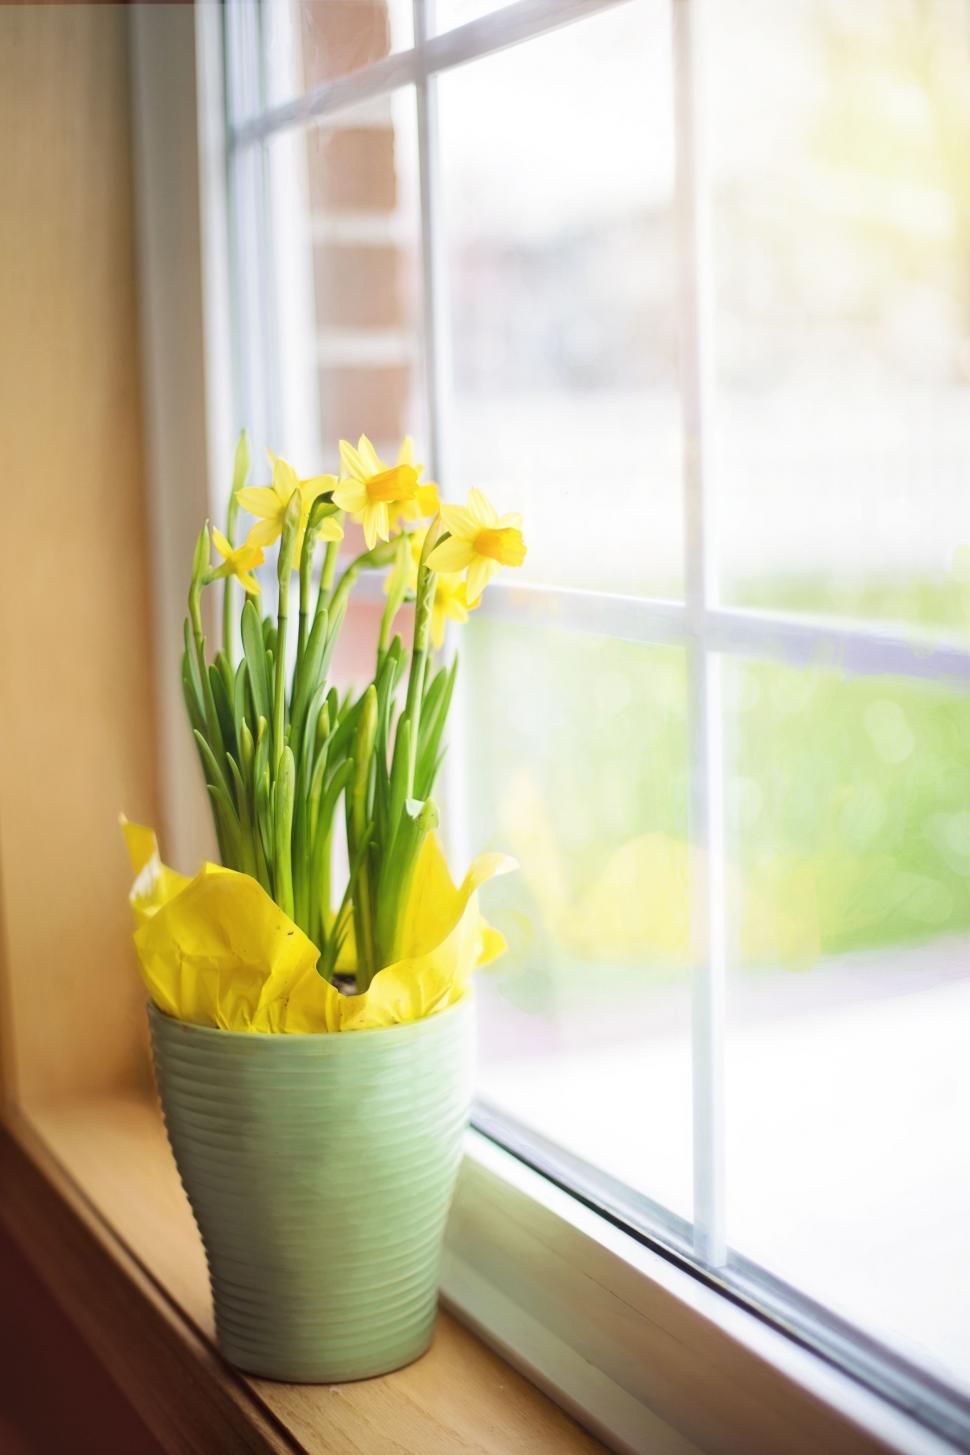 Free Image of Yellow Flowers and Window  